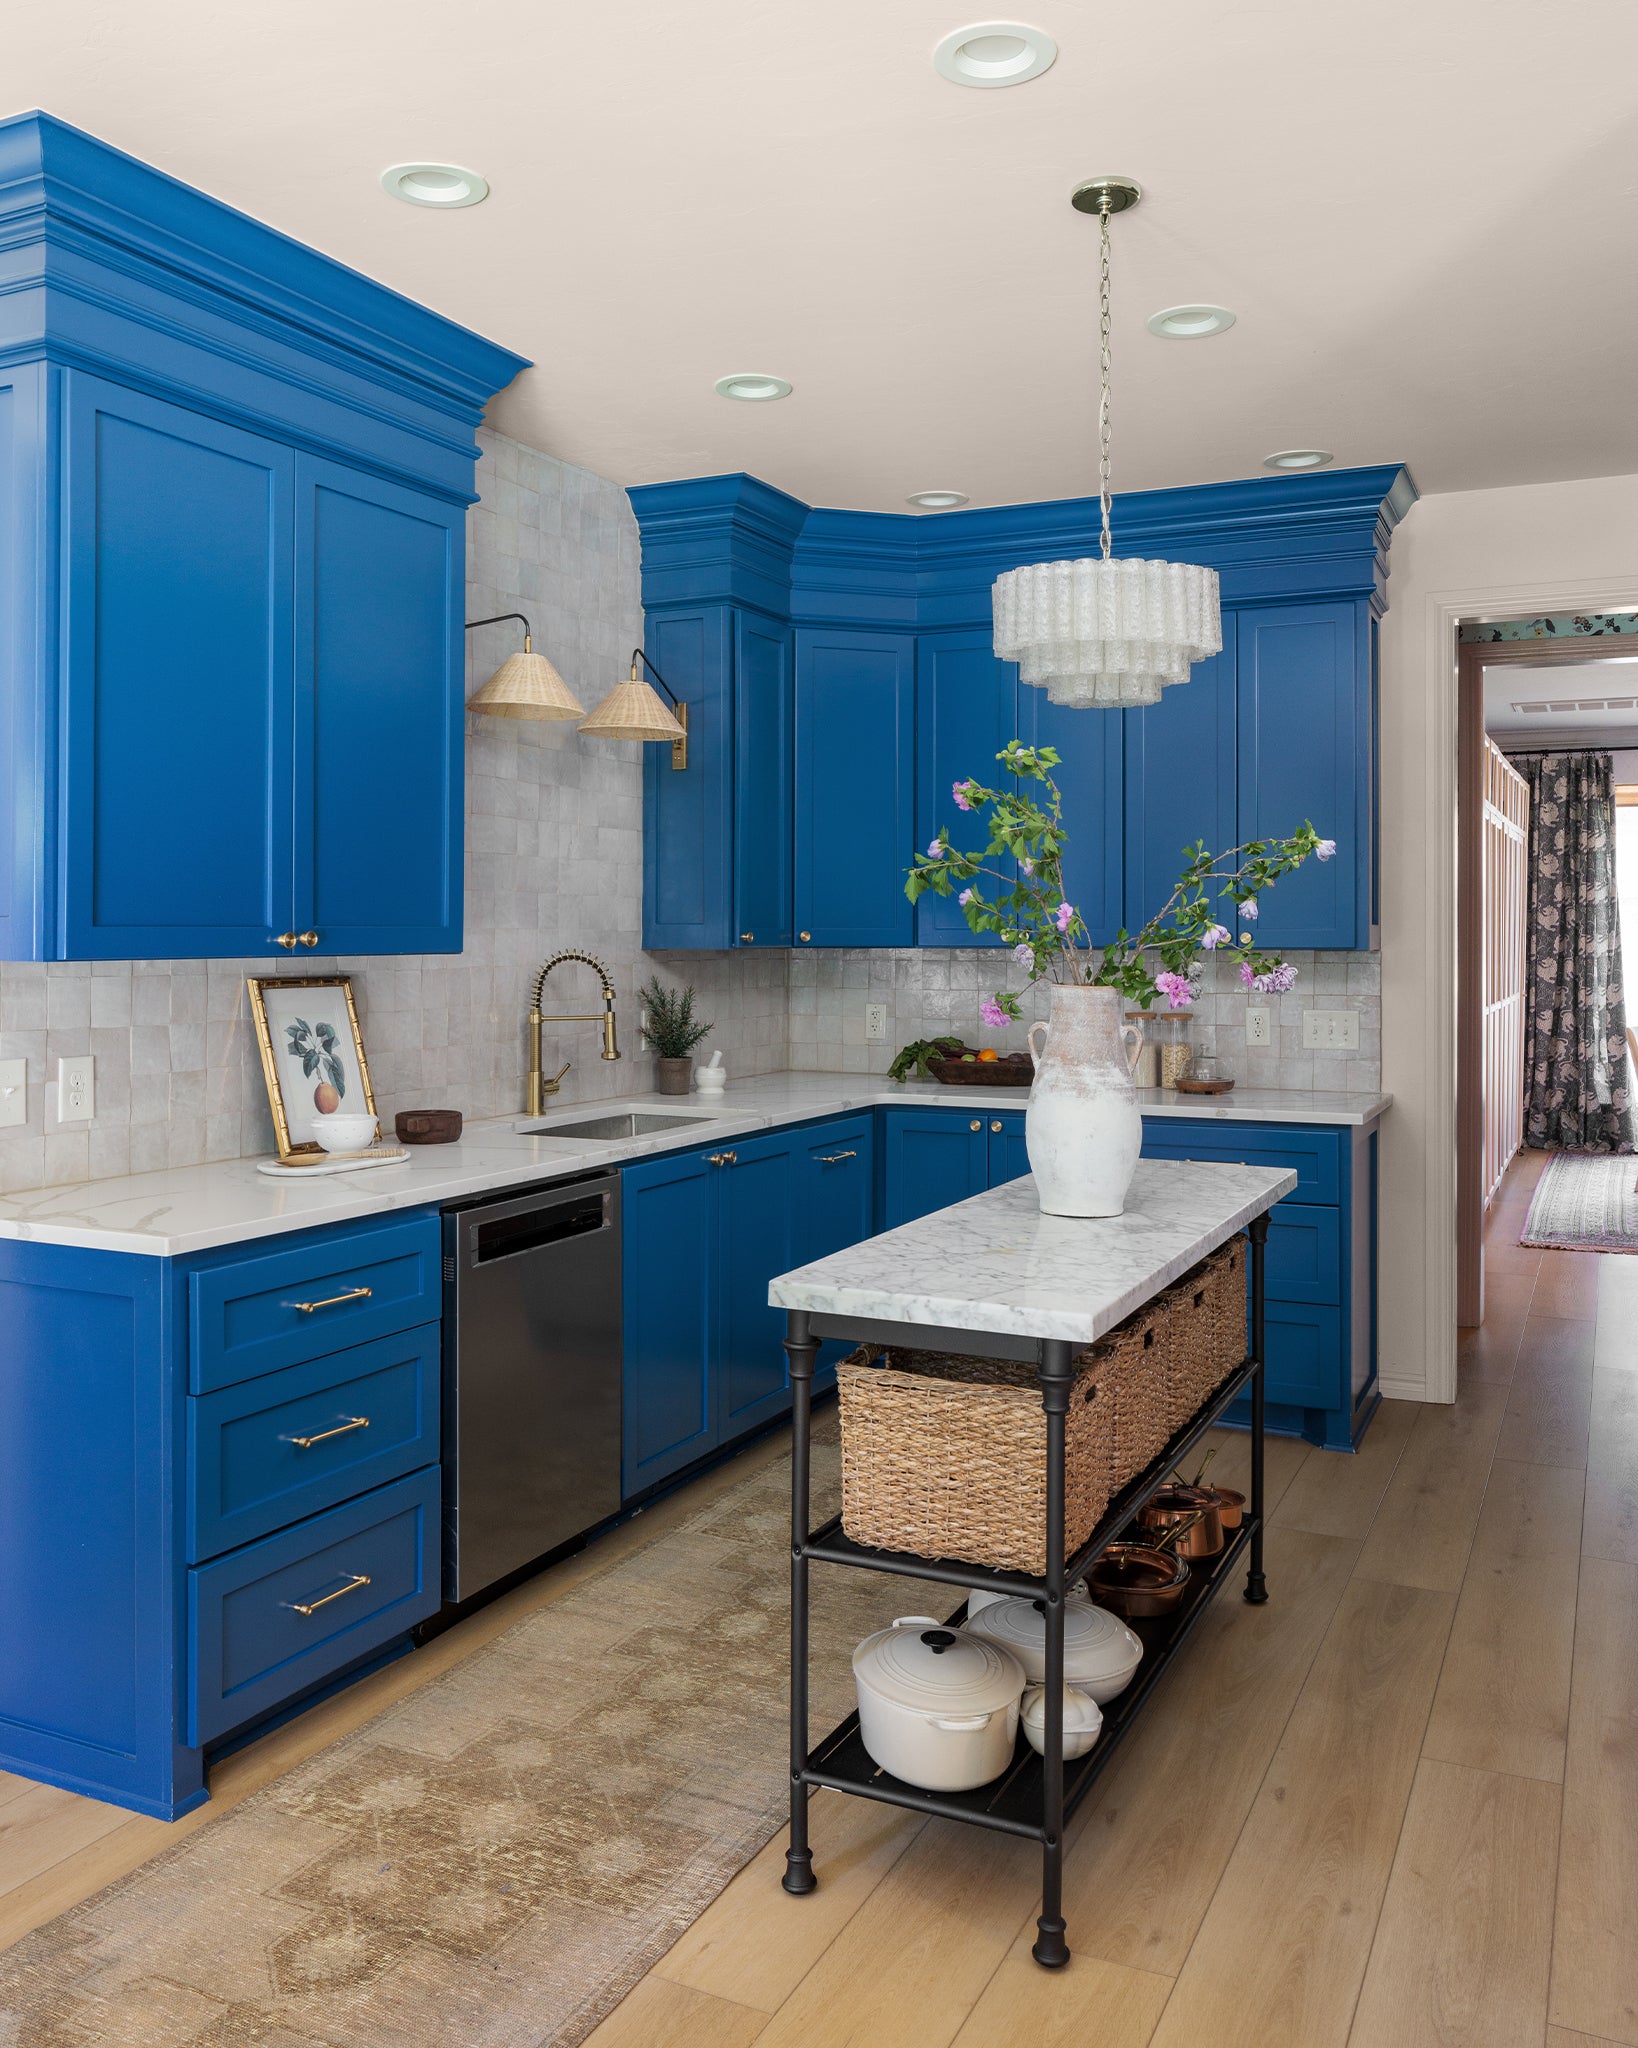 Create a Colorful Look with these Kitchen Renovation Styles – Clare